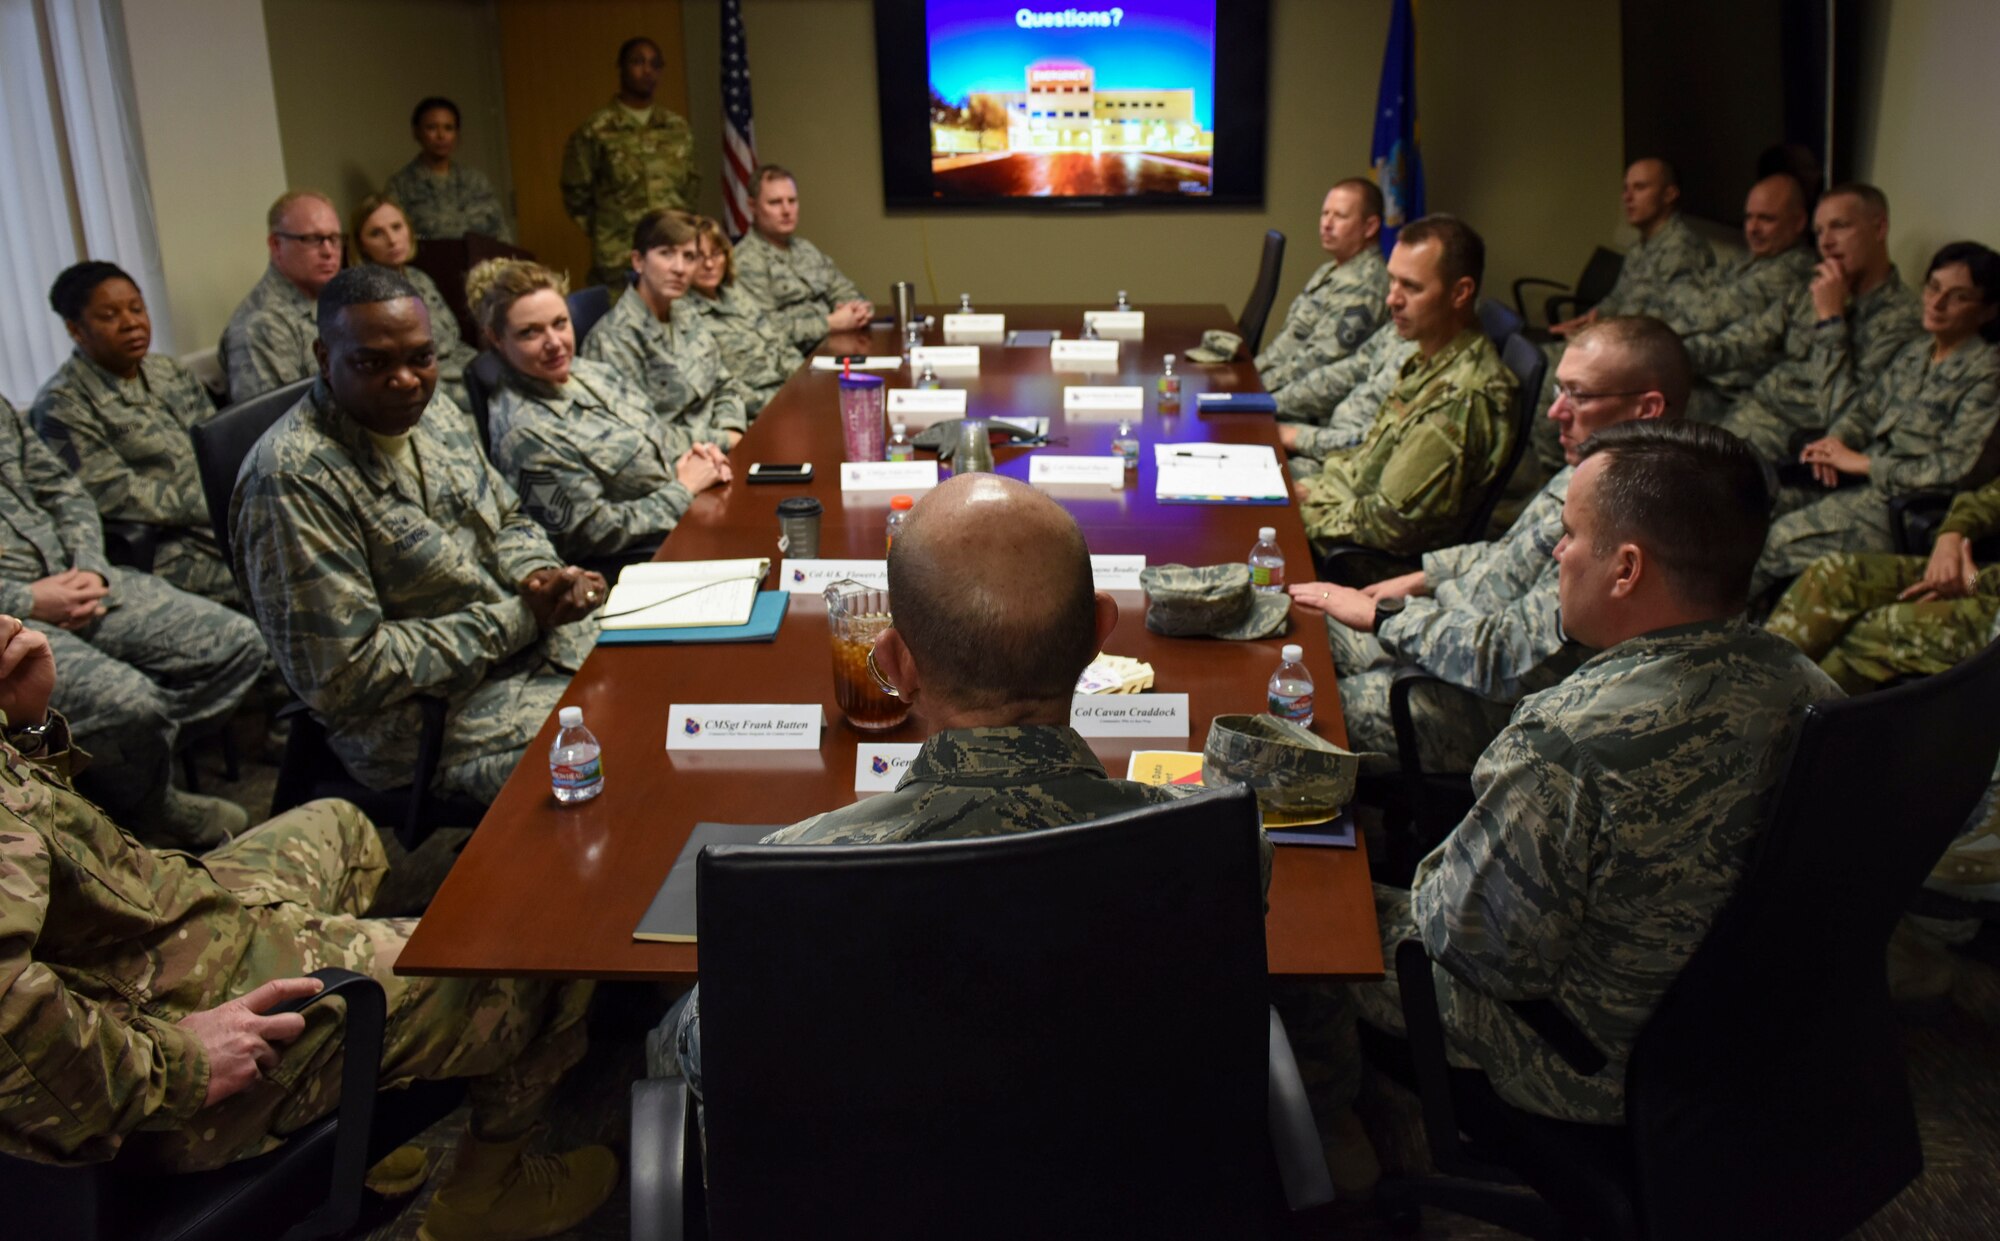 A group of Airmen sit around a table during a conference.